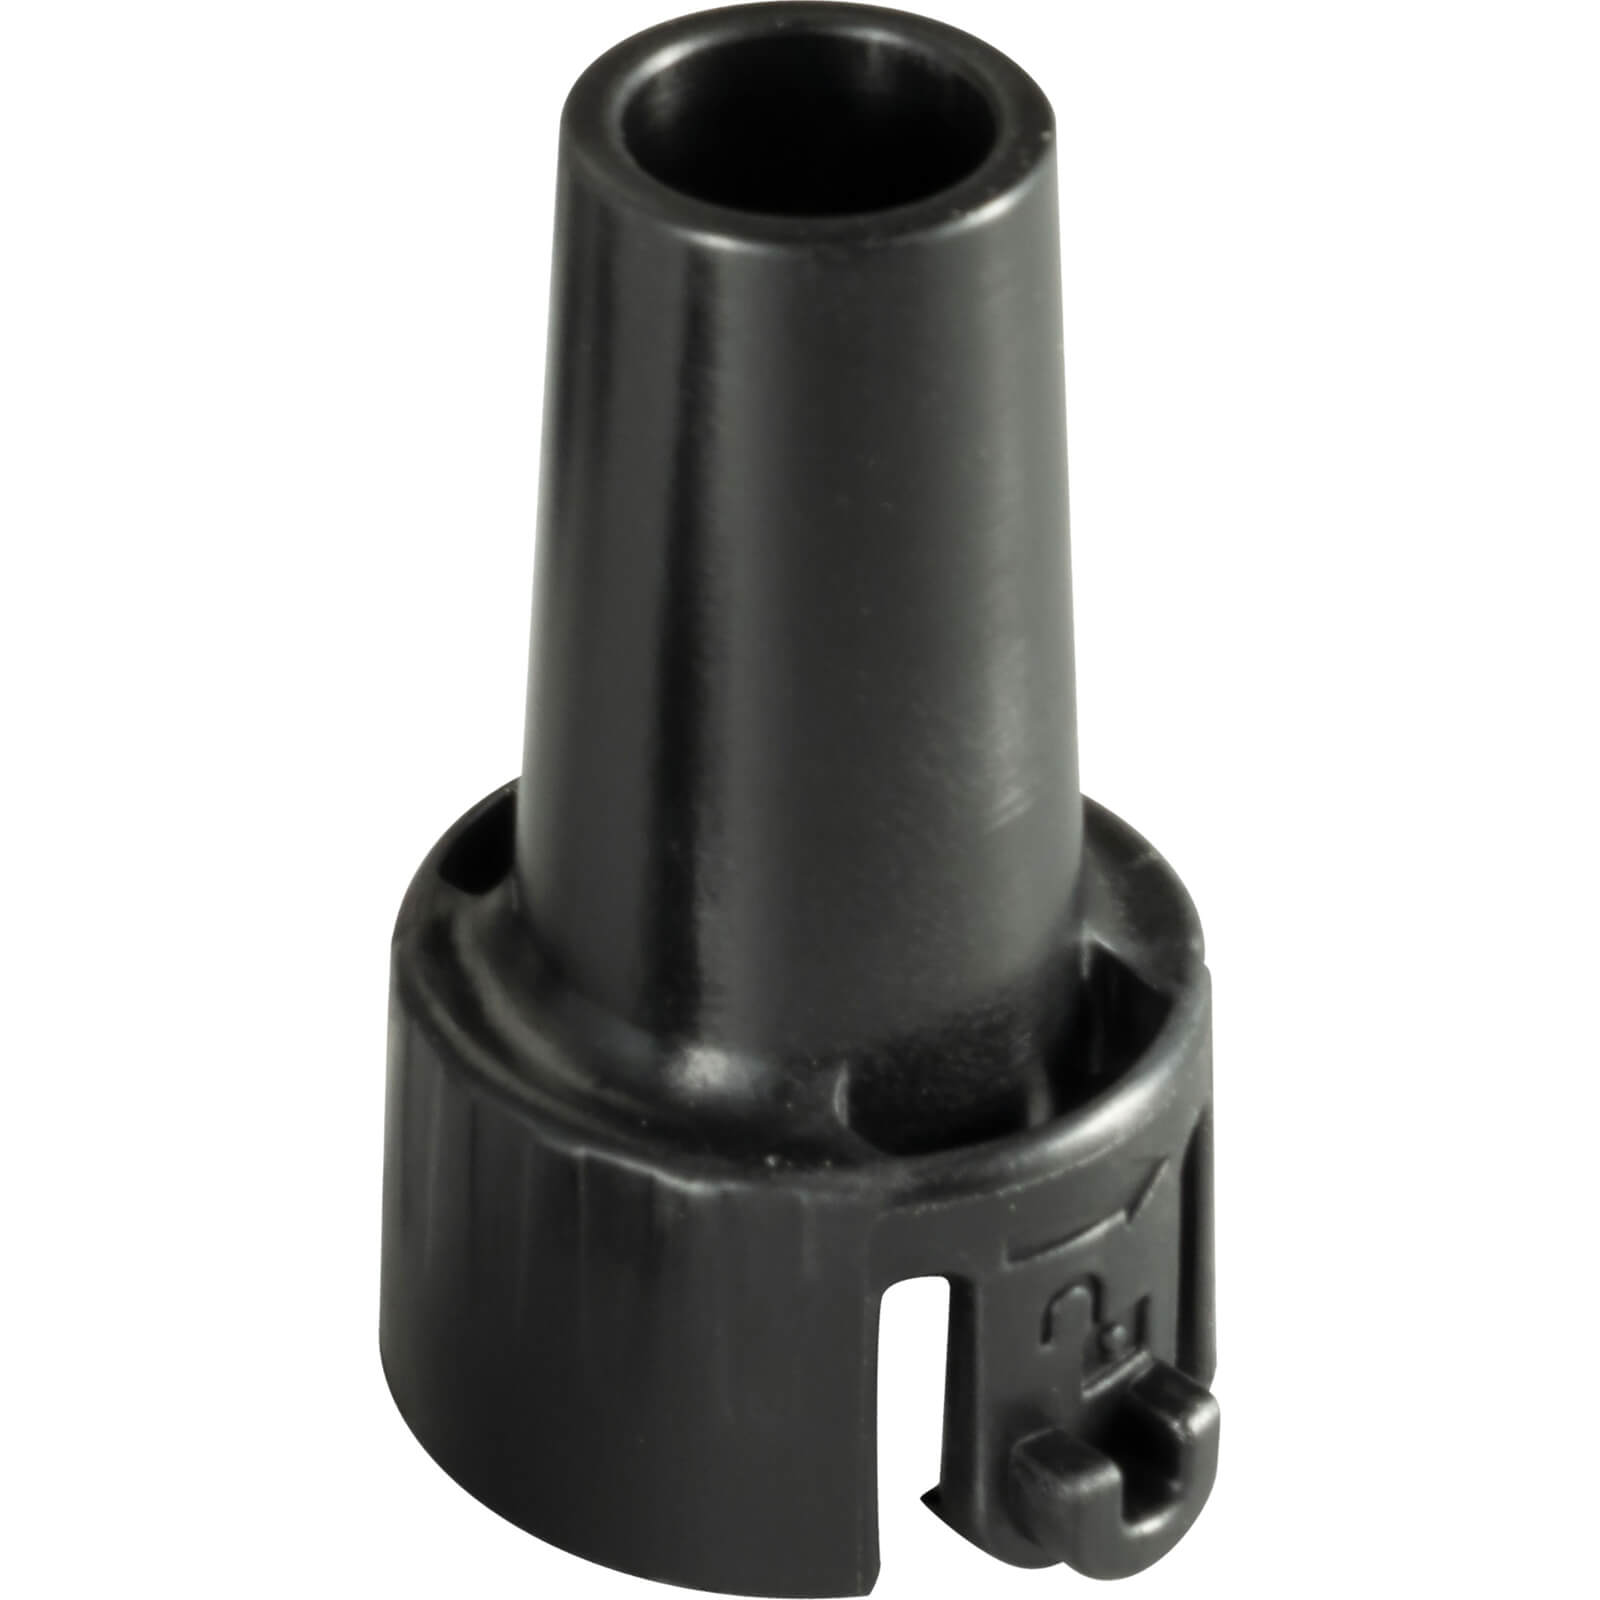 Makita Nozzle 13 for AS001G Dust Blower